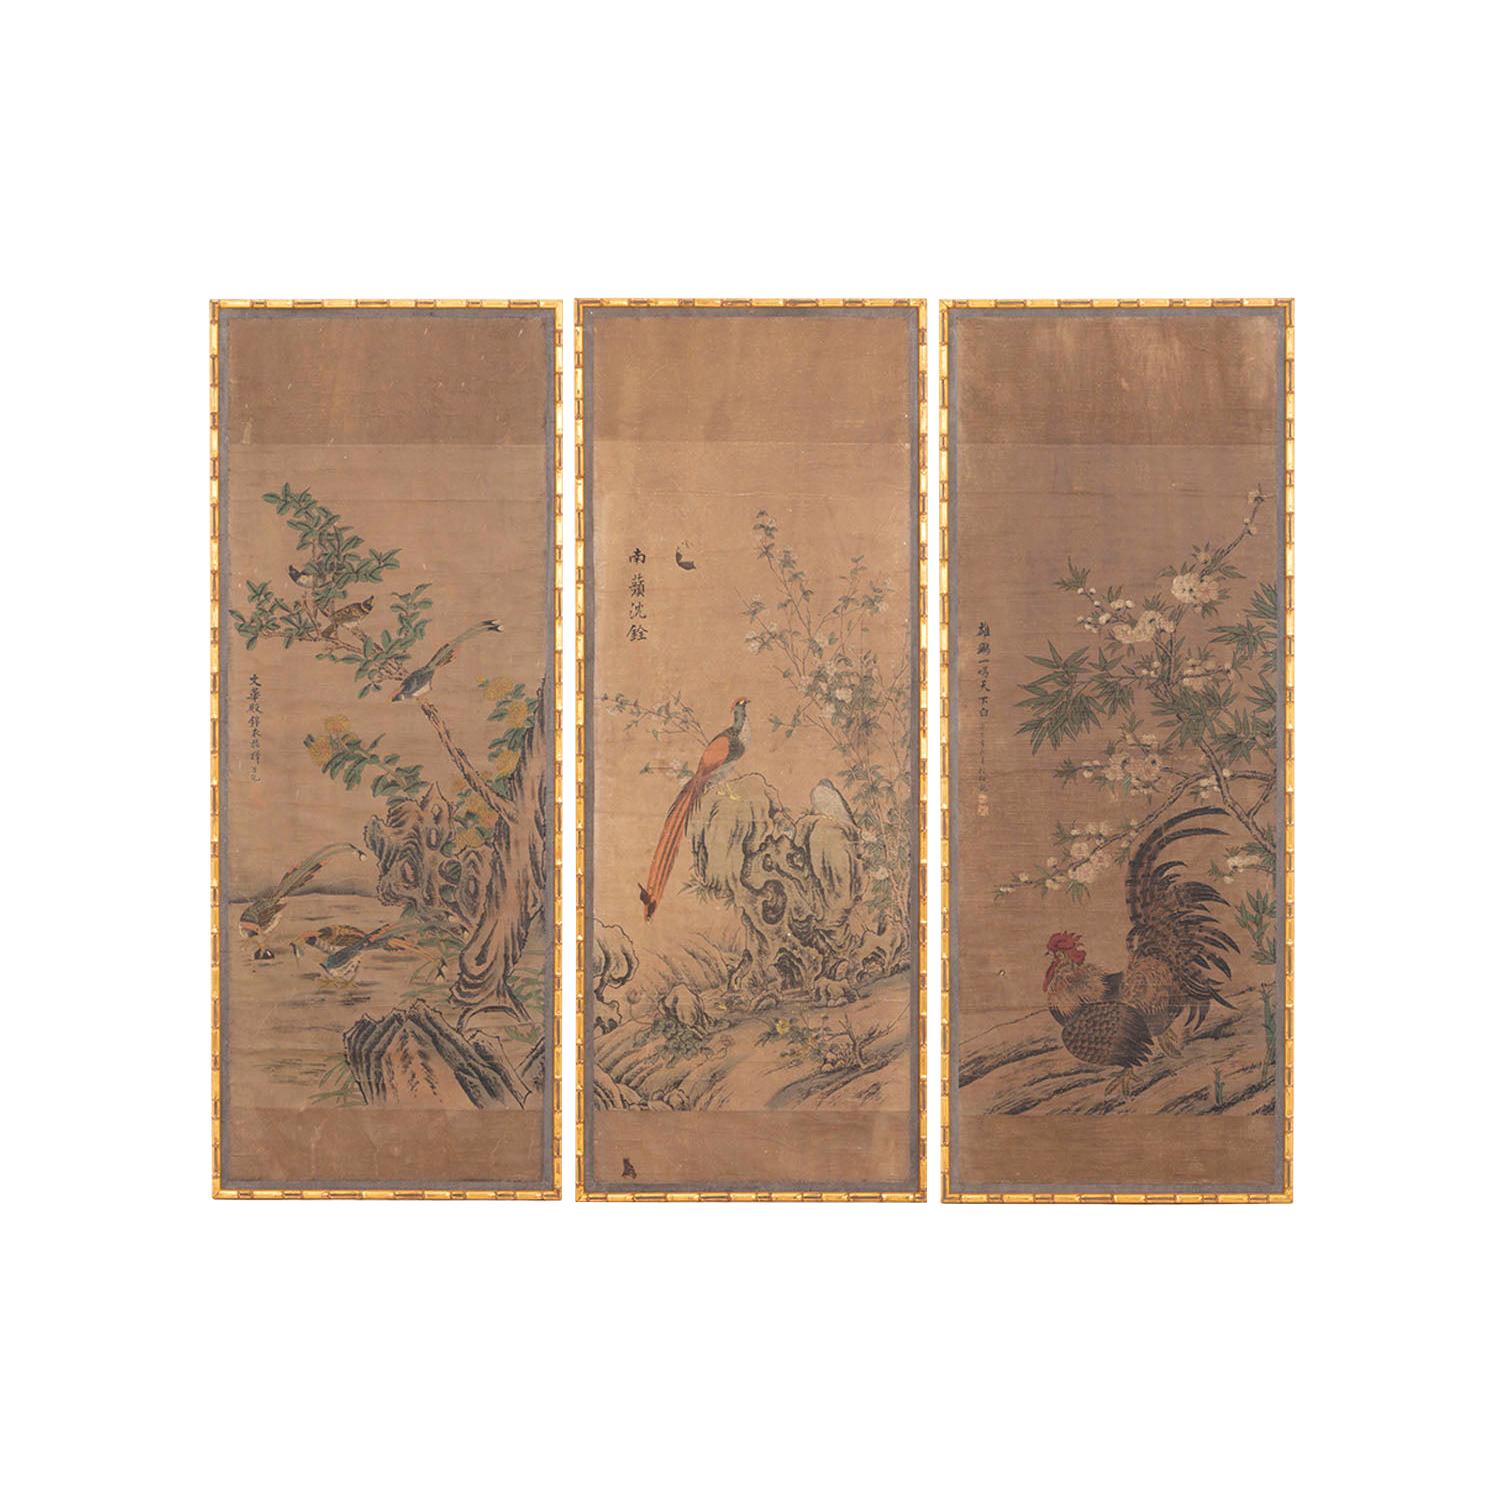 Three Panels in Rice Paper with a Chinese Decor, circa 1880